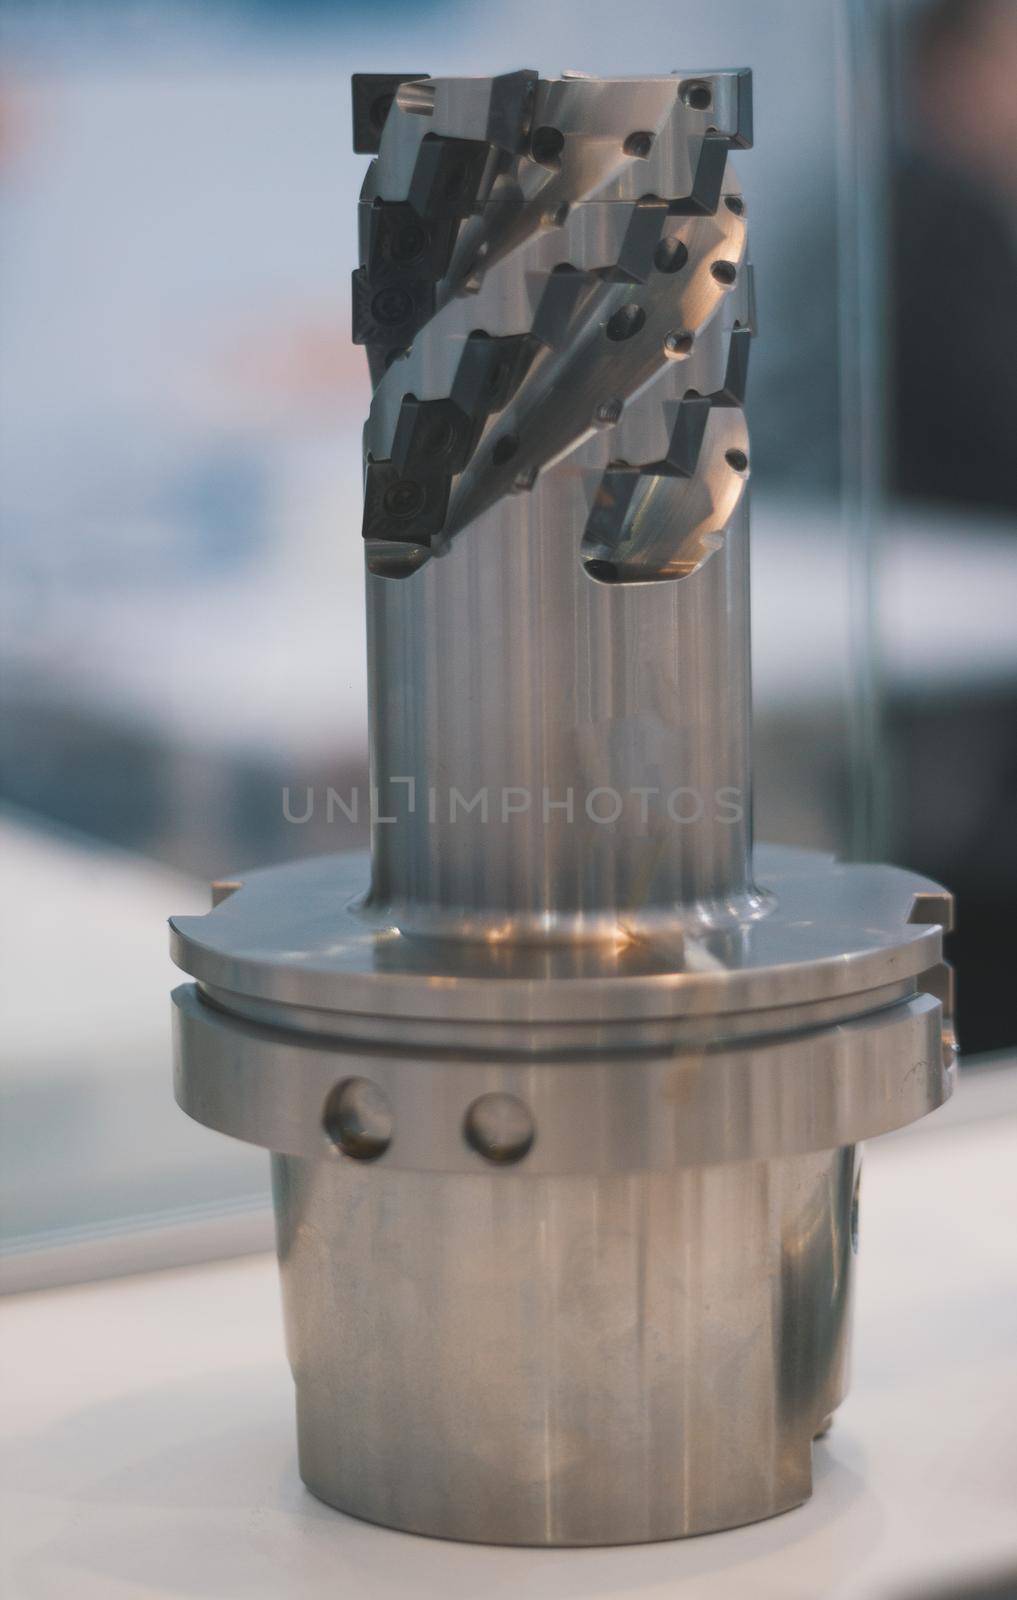 Milling cutter head for wood processing - metal industry, close up